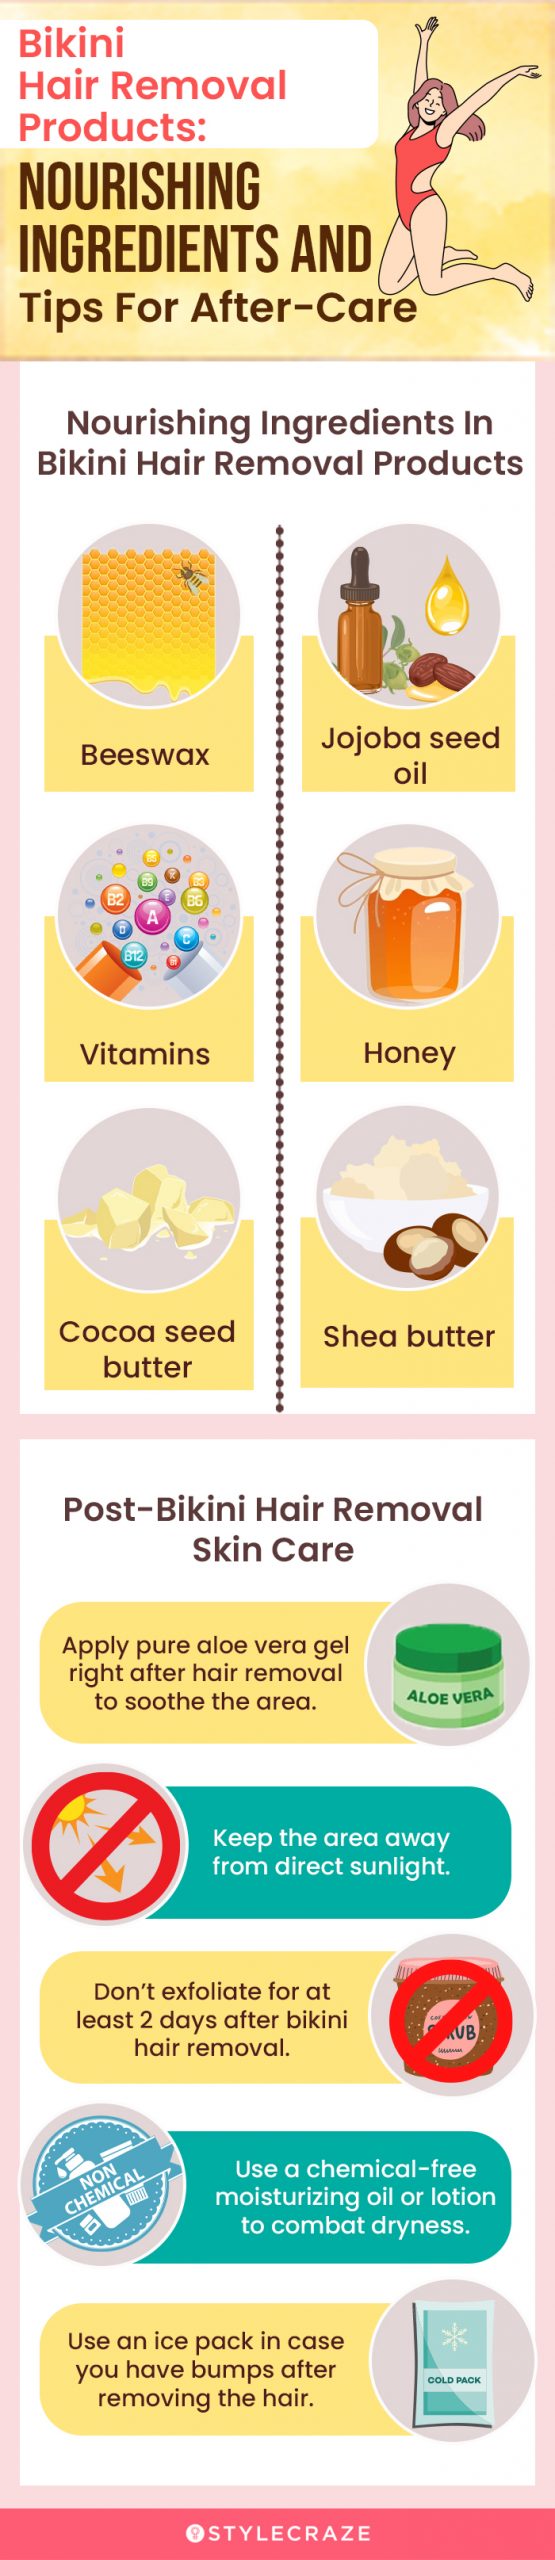 10 Best Bikini Hair Removal Products That Actually Work - 2023